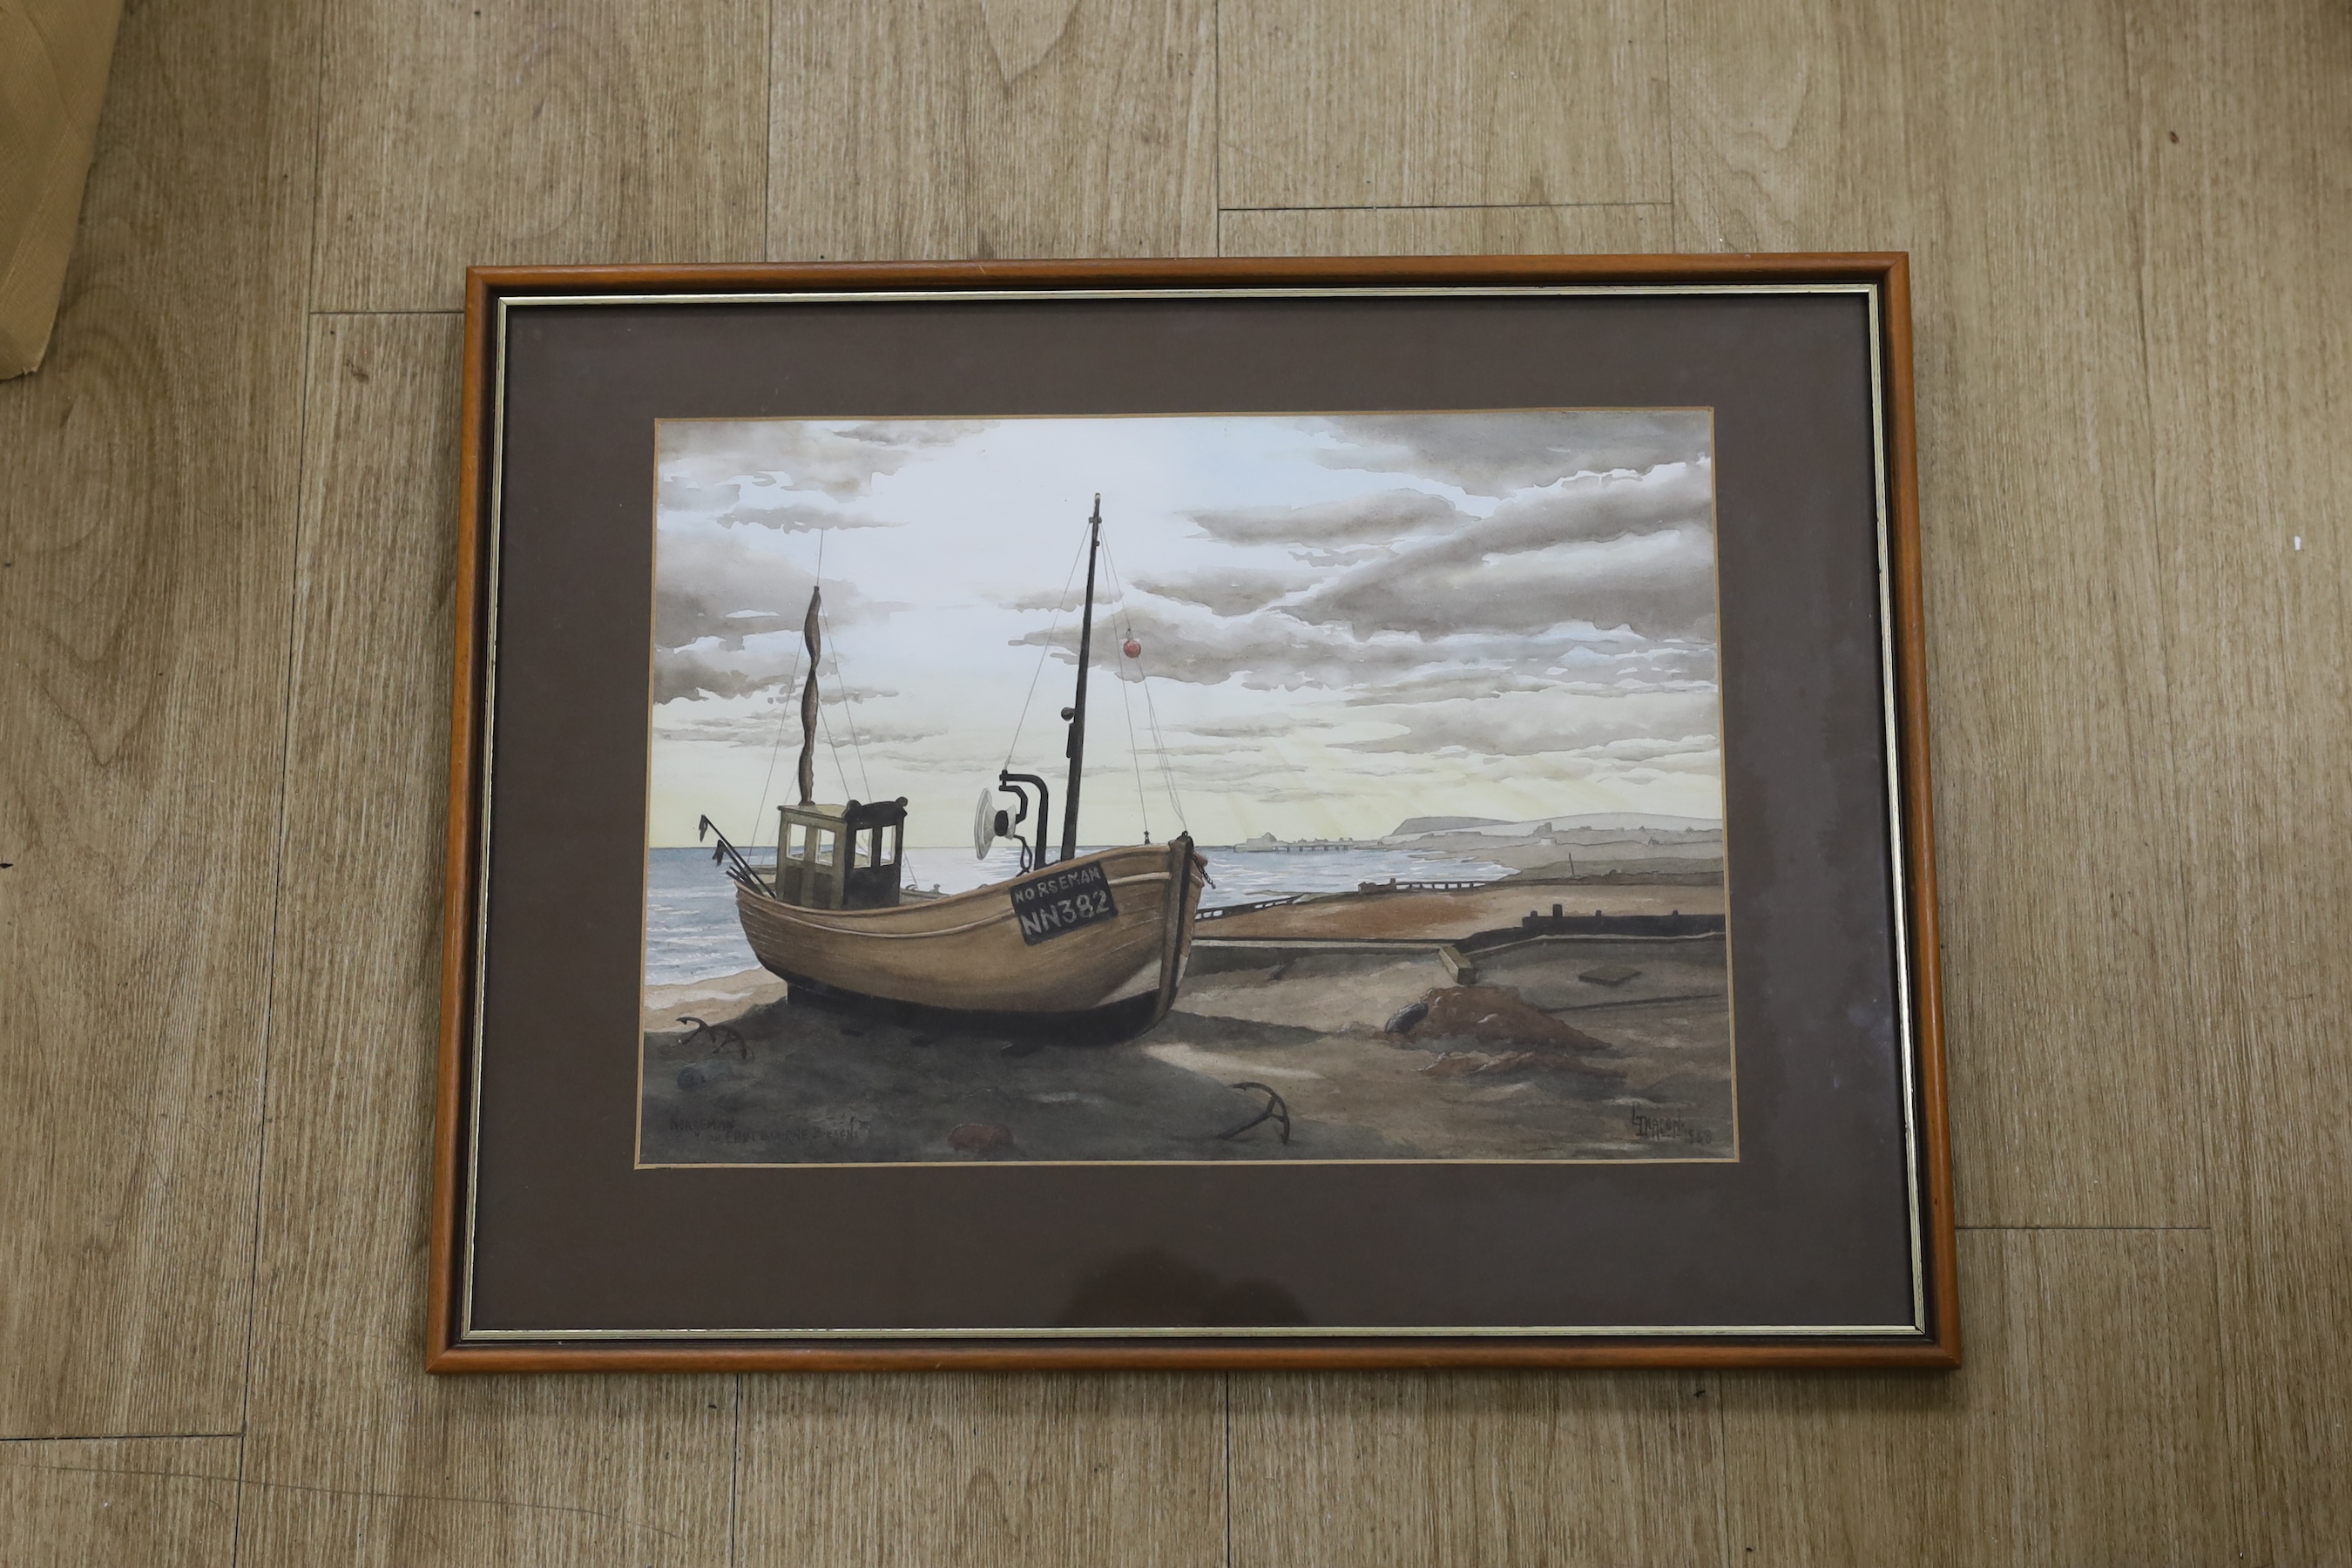 L Deacon, watercolour, 'Northman fishing boat on Eastbourne beach', signed and dated 1988, 28 x 40cm